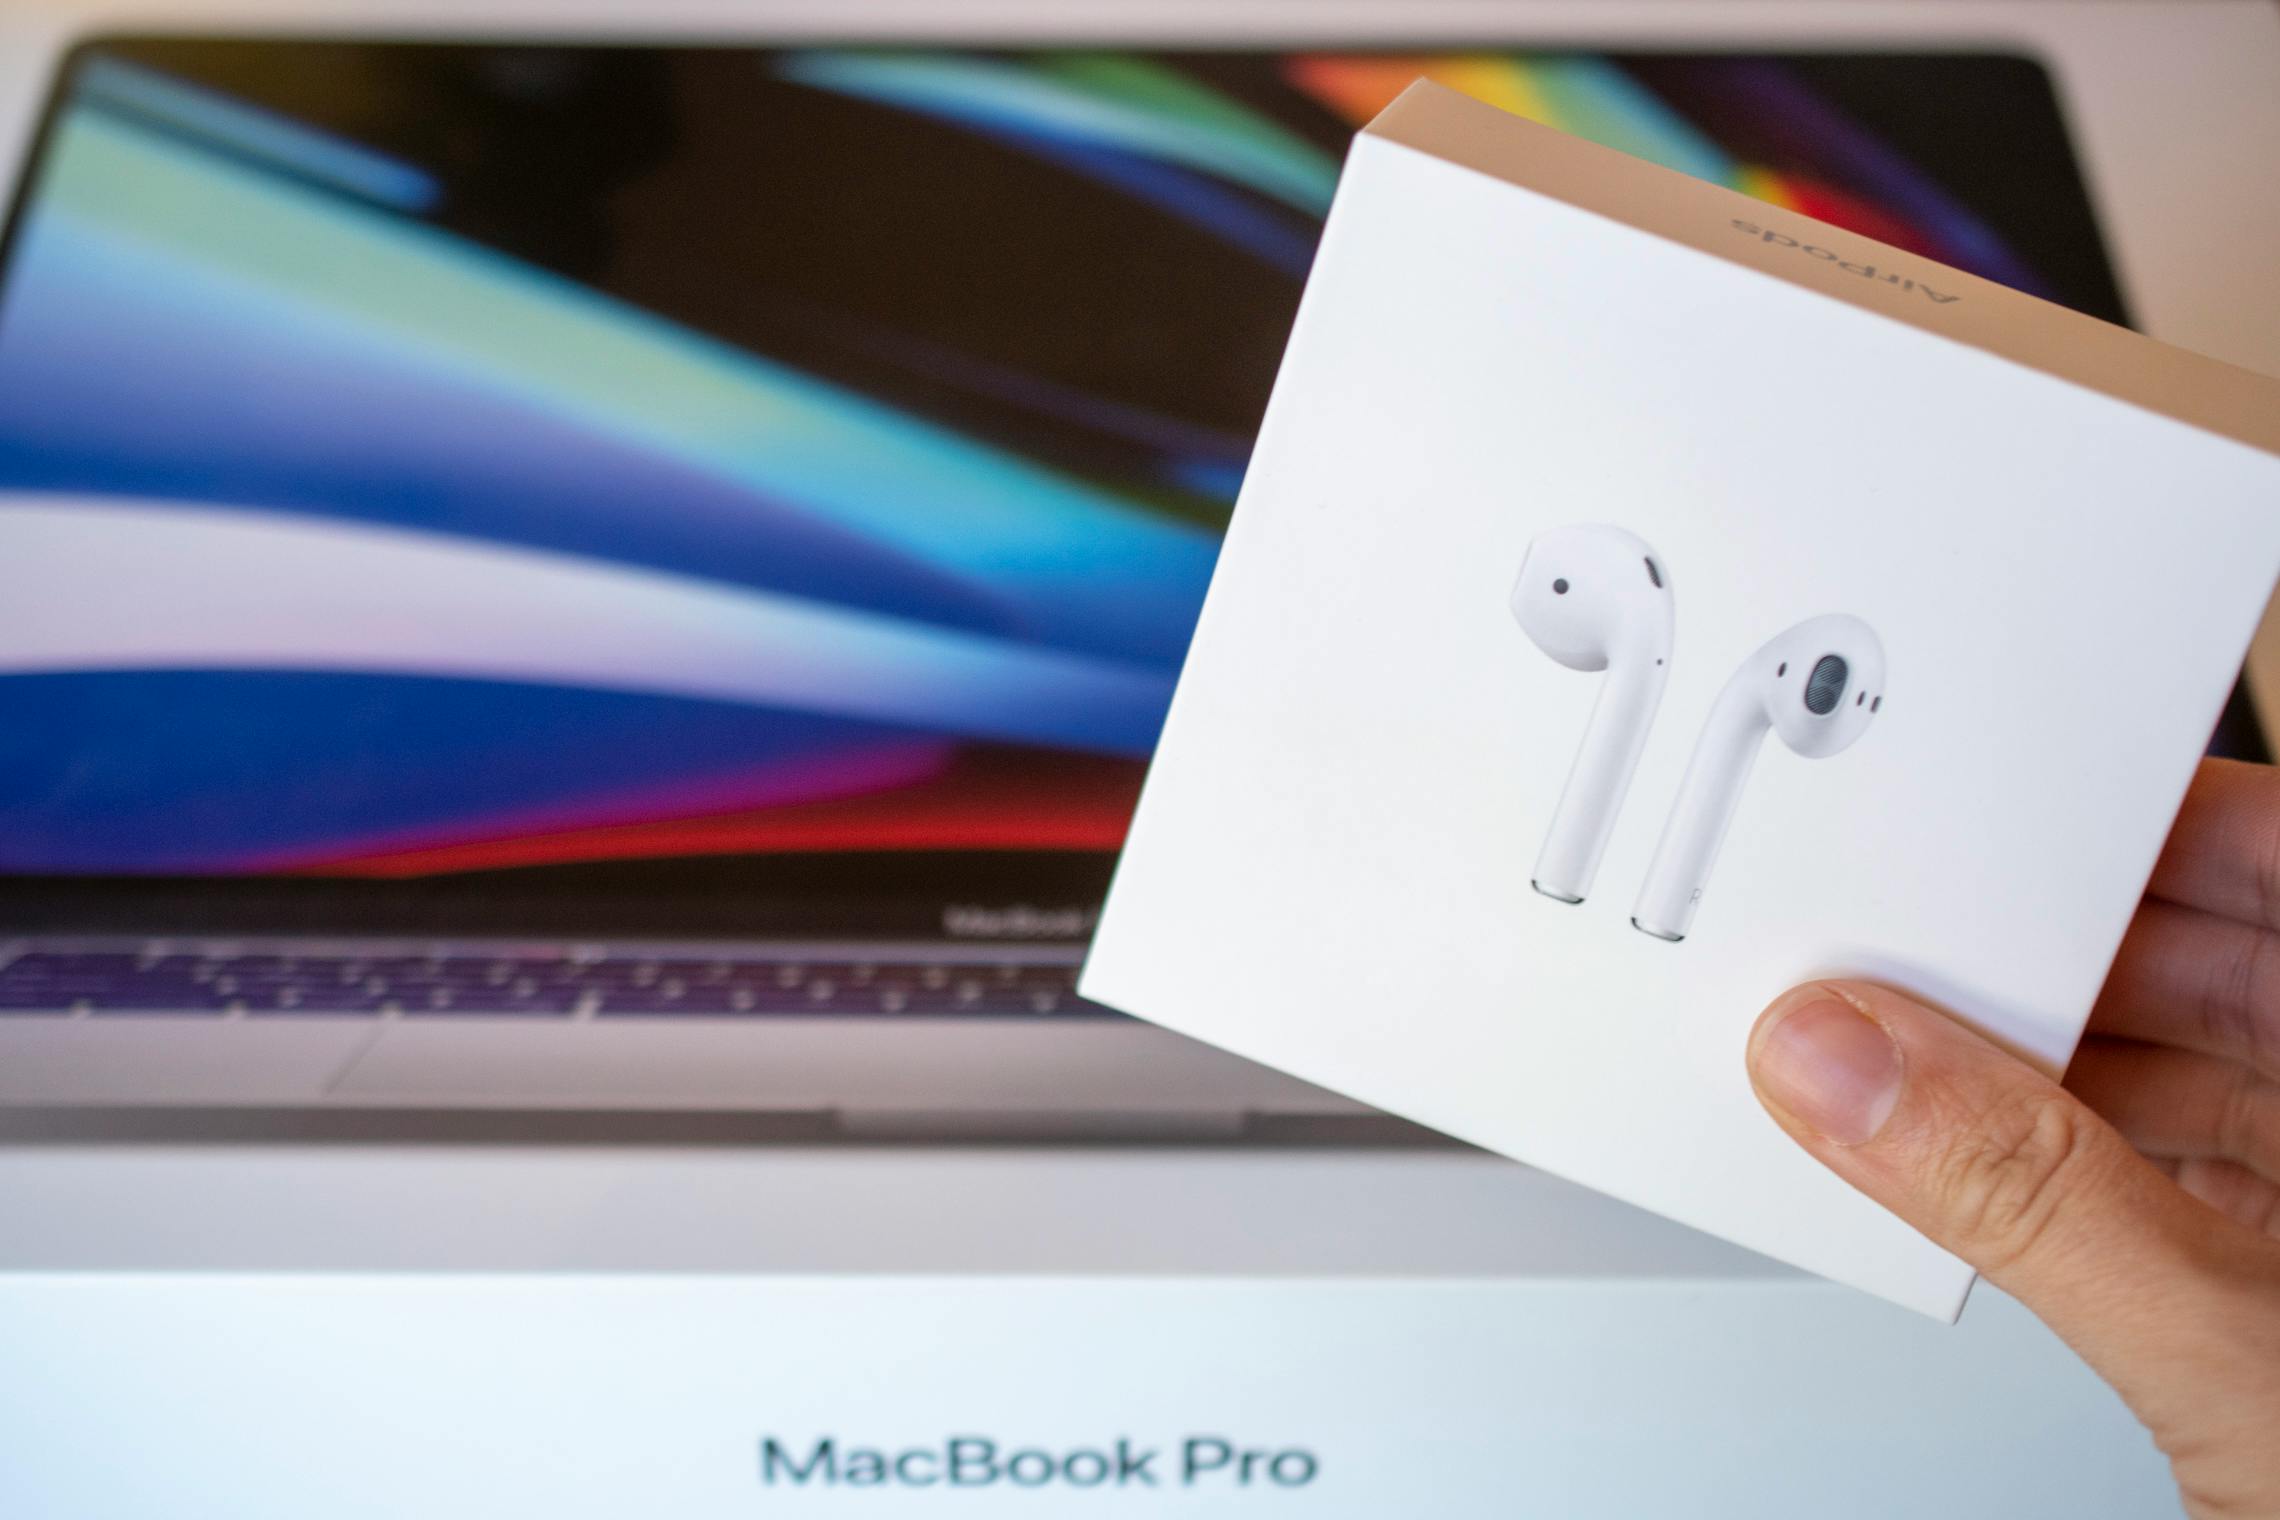 Apple airpods box held in front of a macbook pro laptop computer.